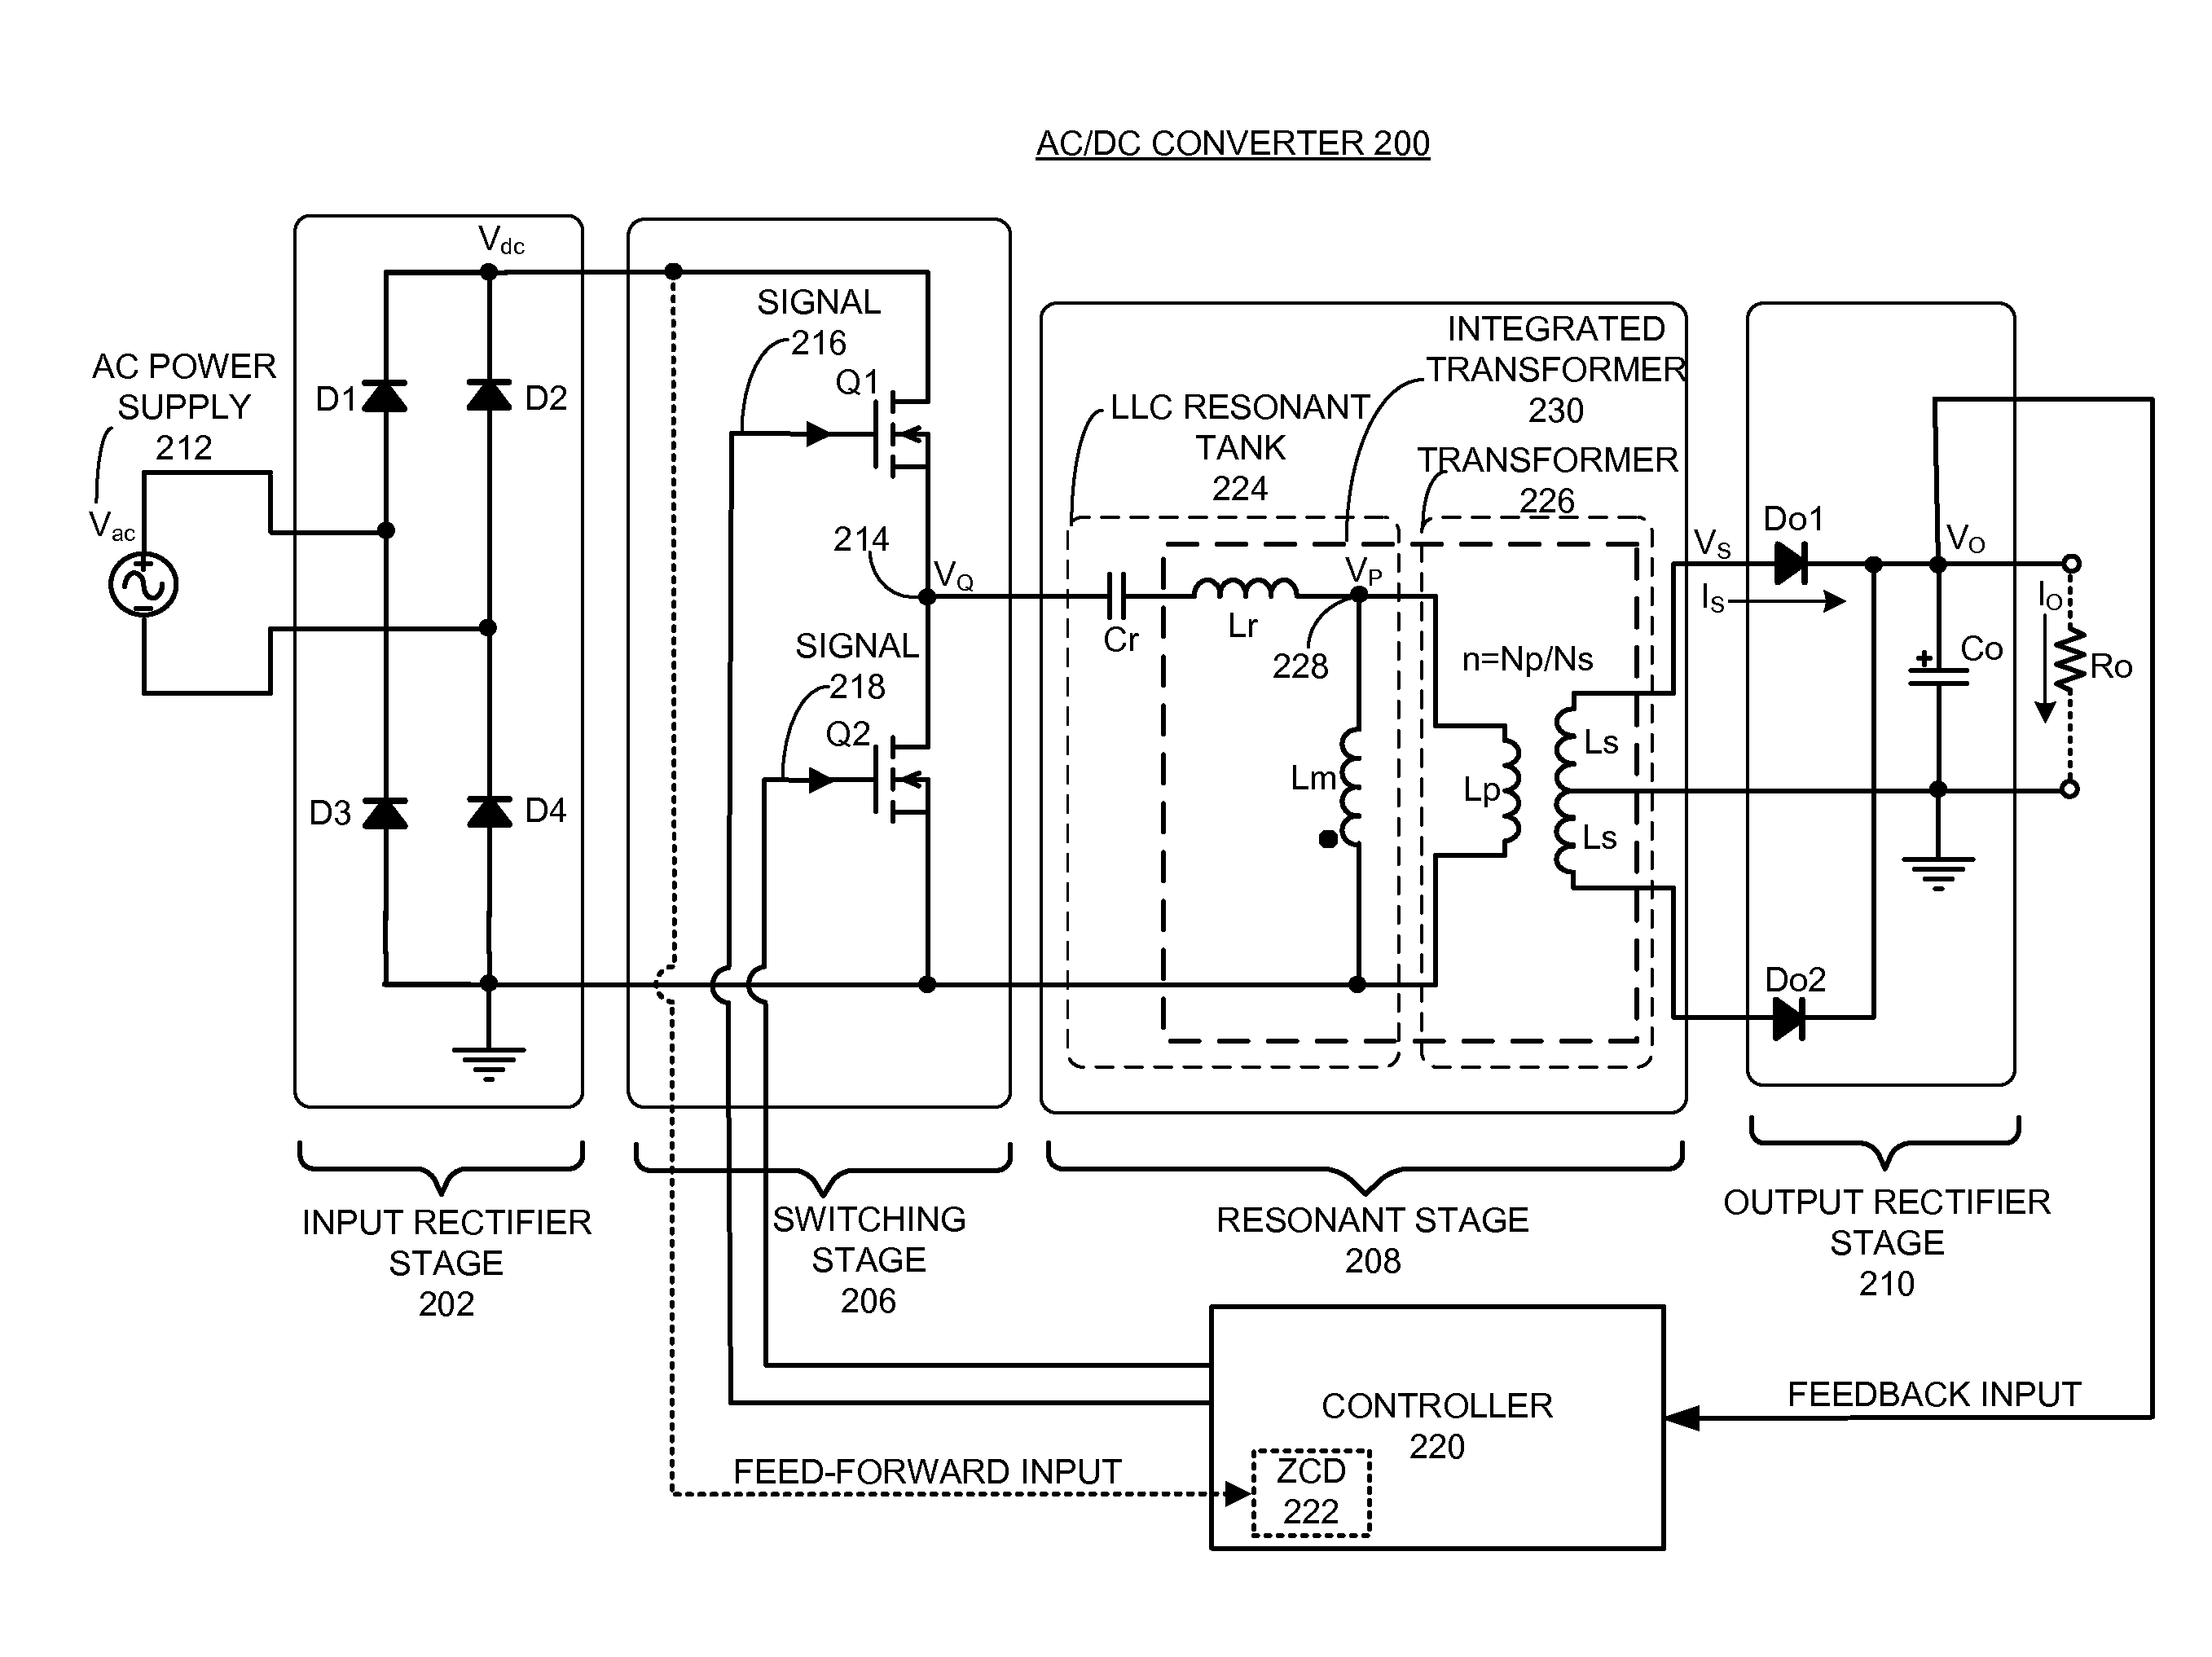 Hysteretic-mode pulse frequency modulated (hm-pfm) resonant ac to DC converter